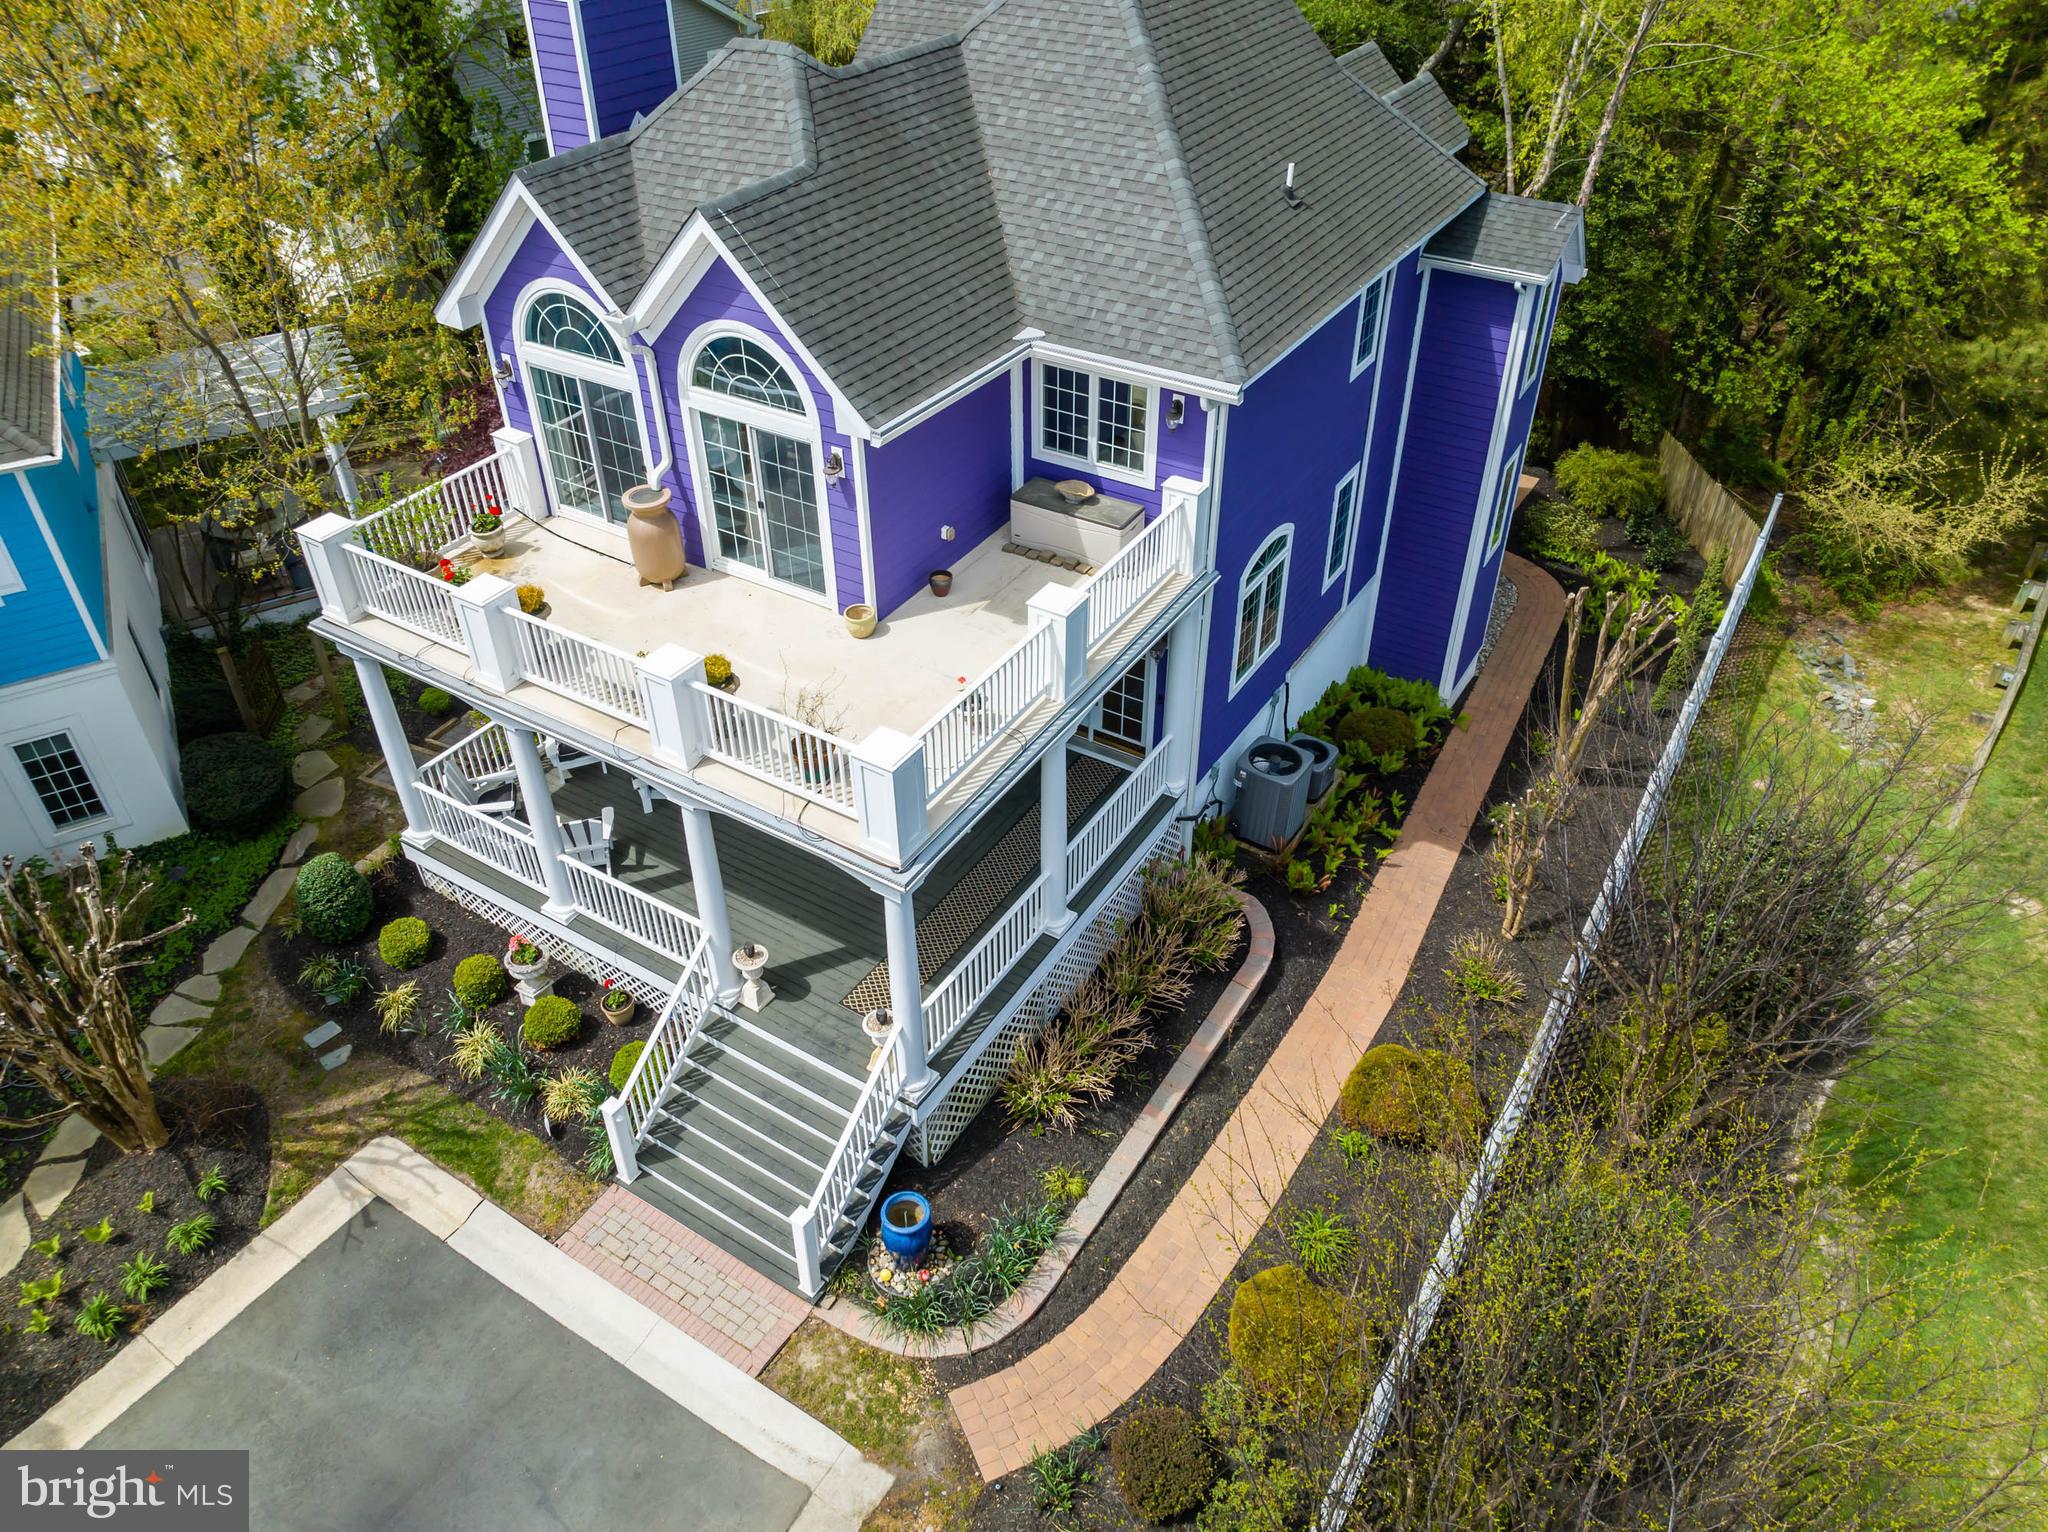 a aerial view of a house with balcony and deck